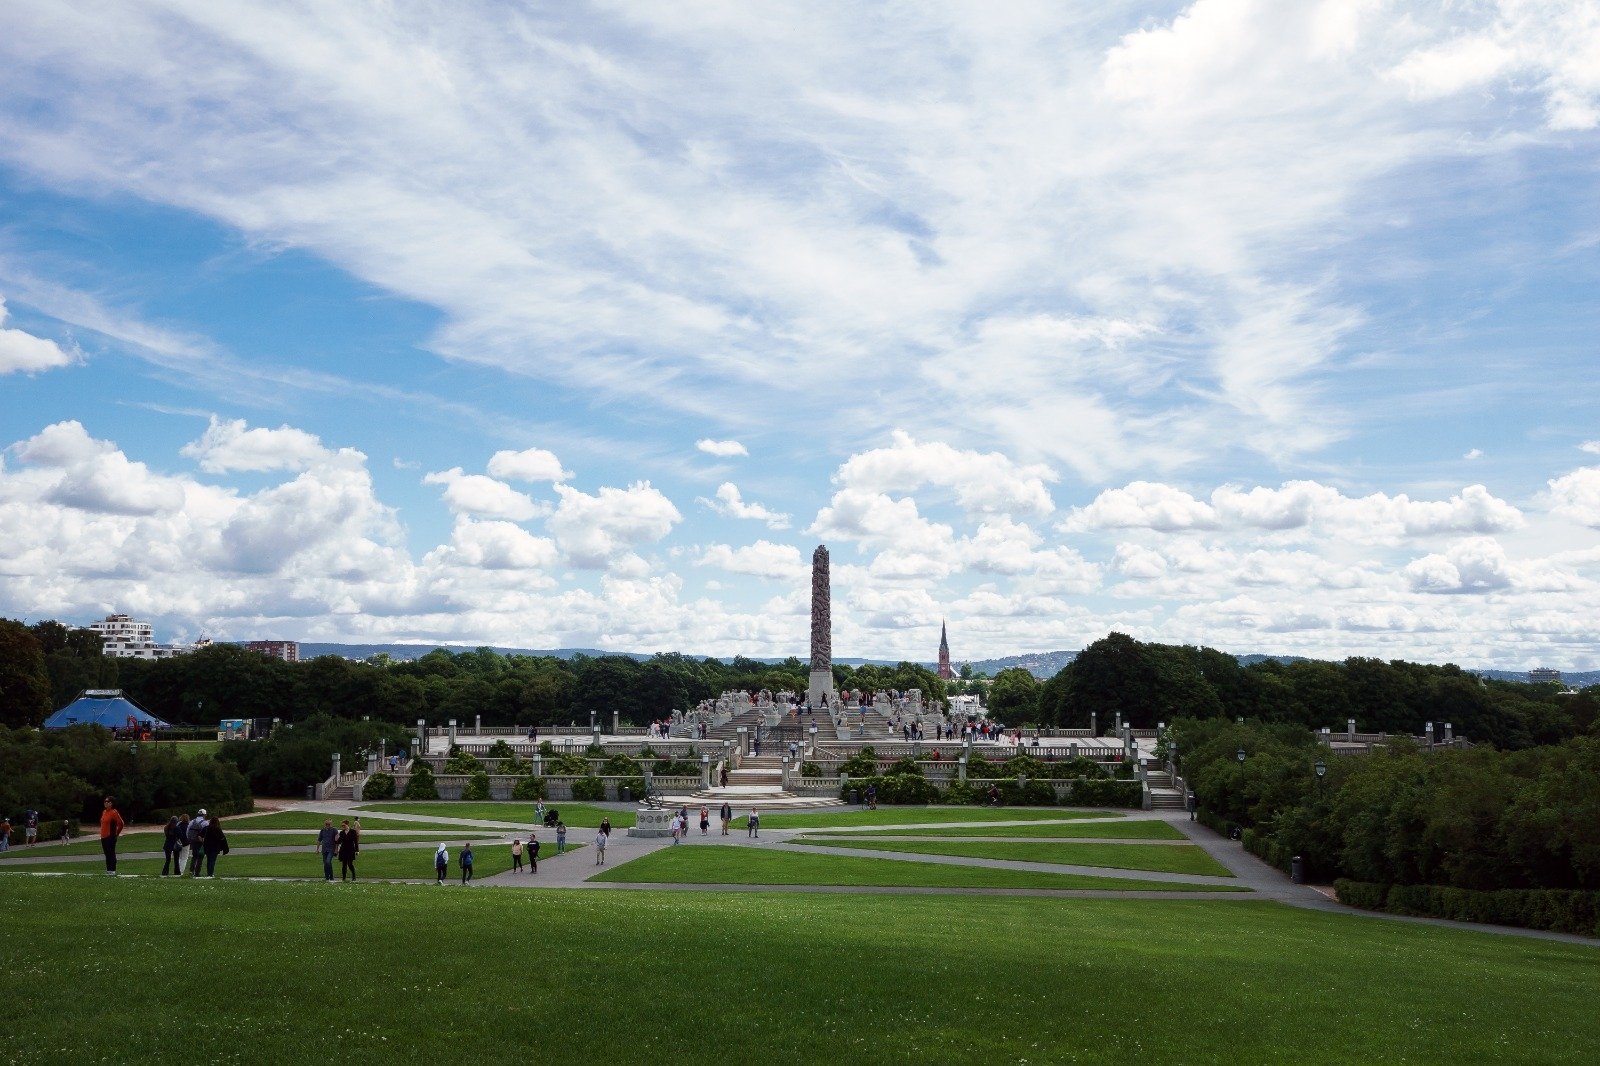 Art in the open air in the Vigeland Sculpture Park. (DPA Photo)